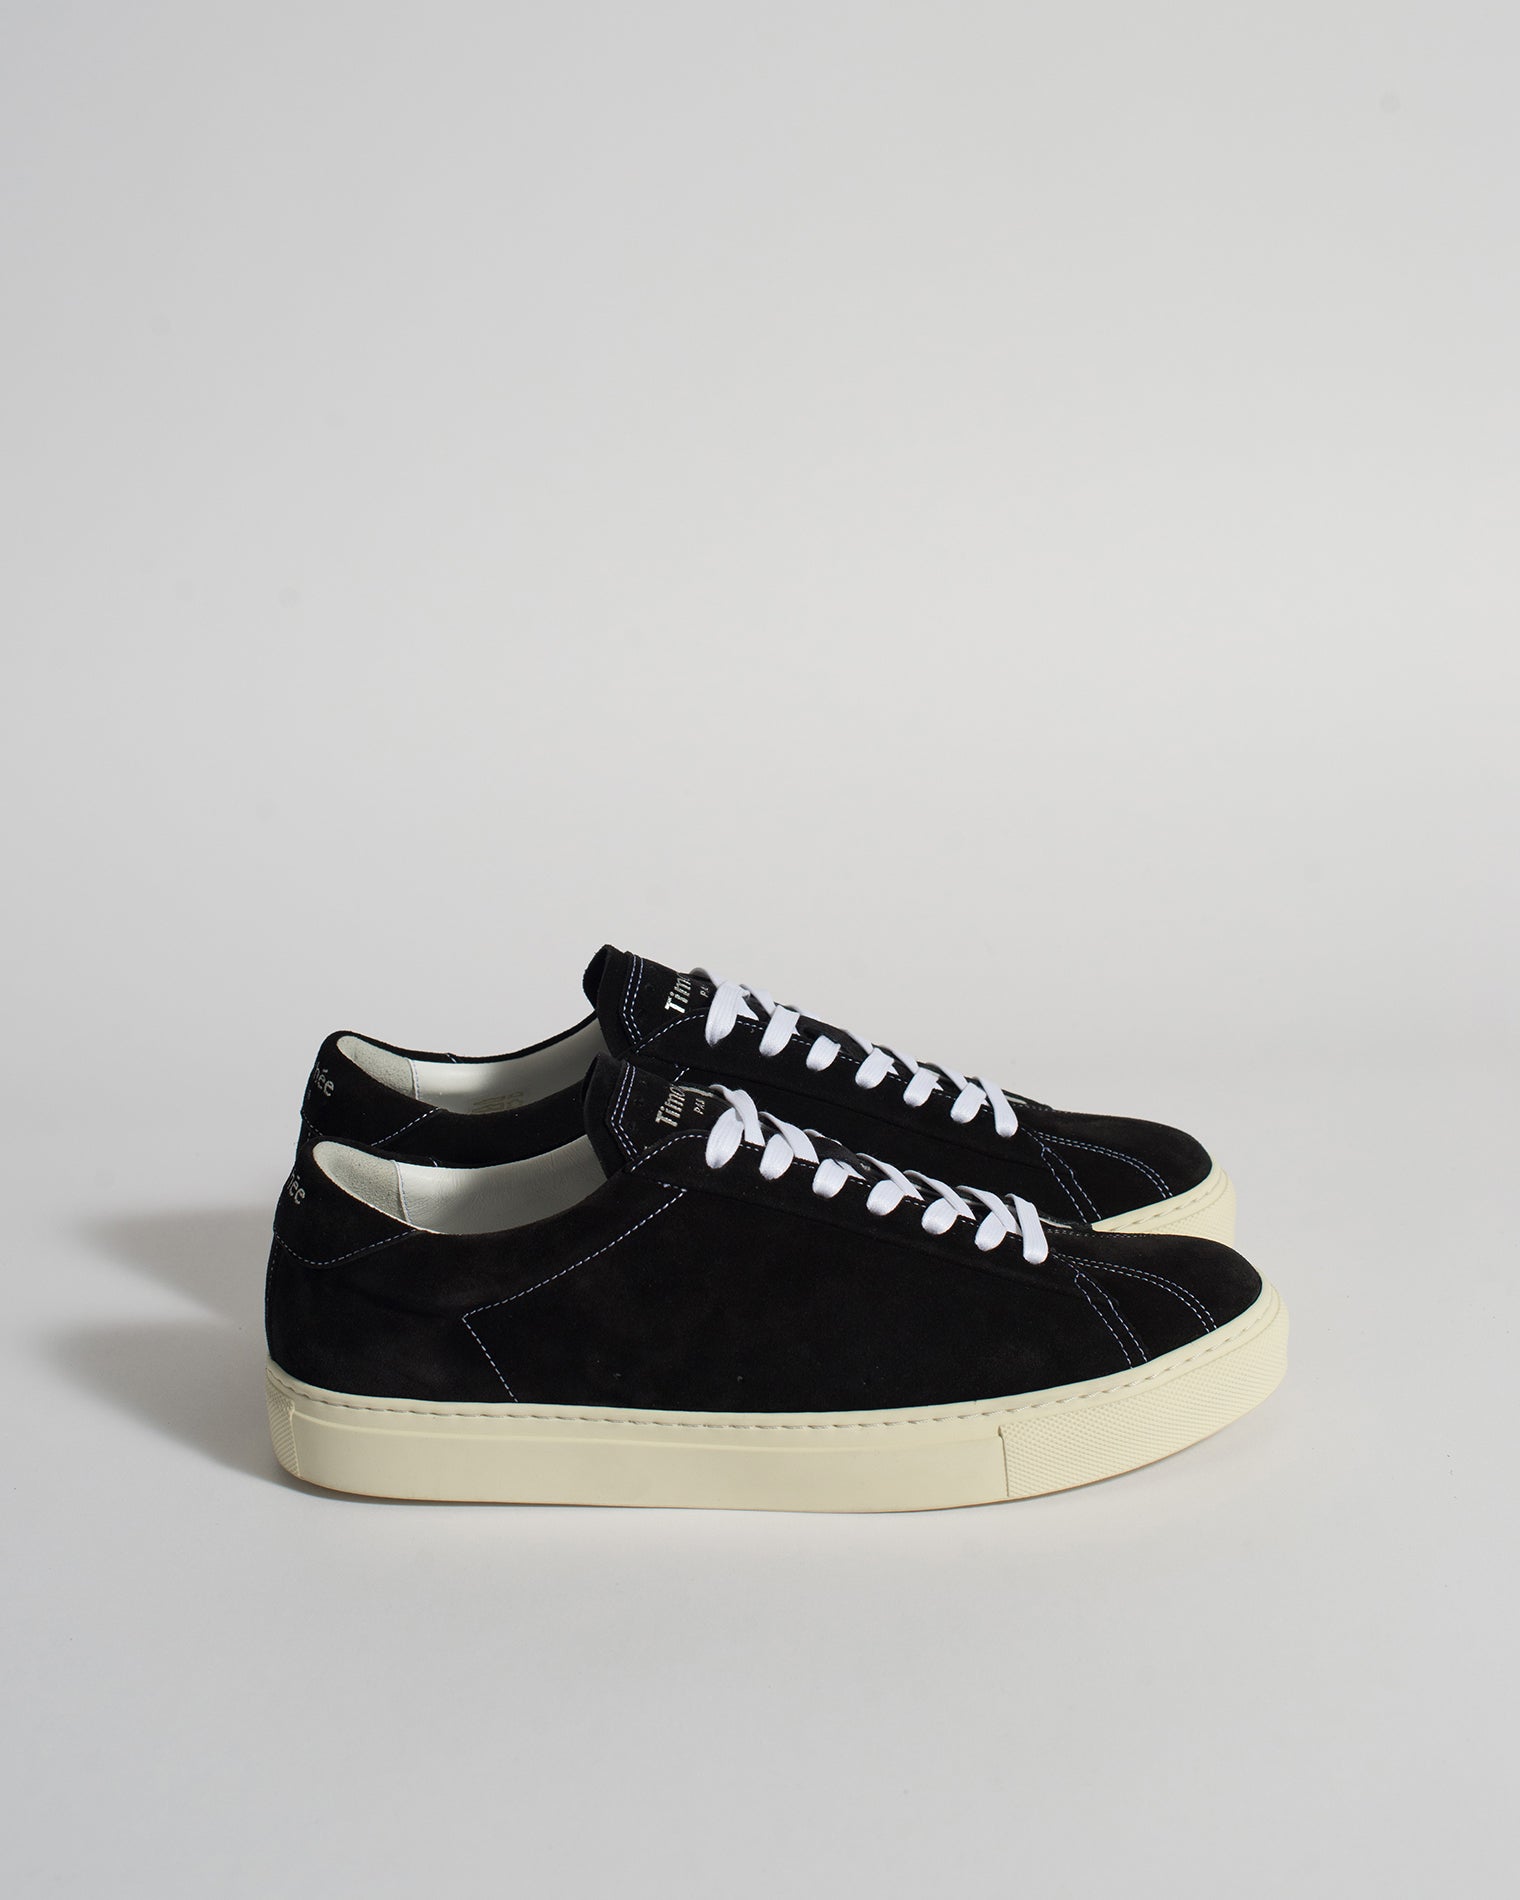 Timothee paris sneaker atlantique black sustainable suede leather with white stitch 